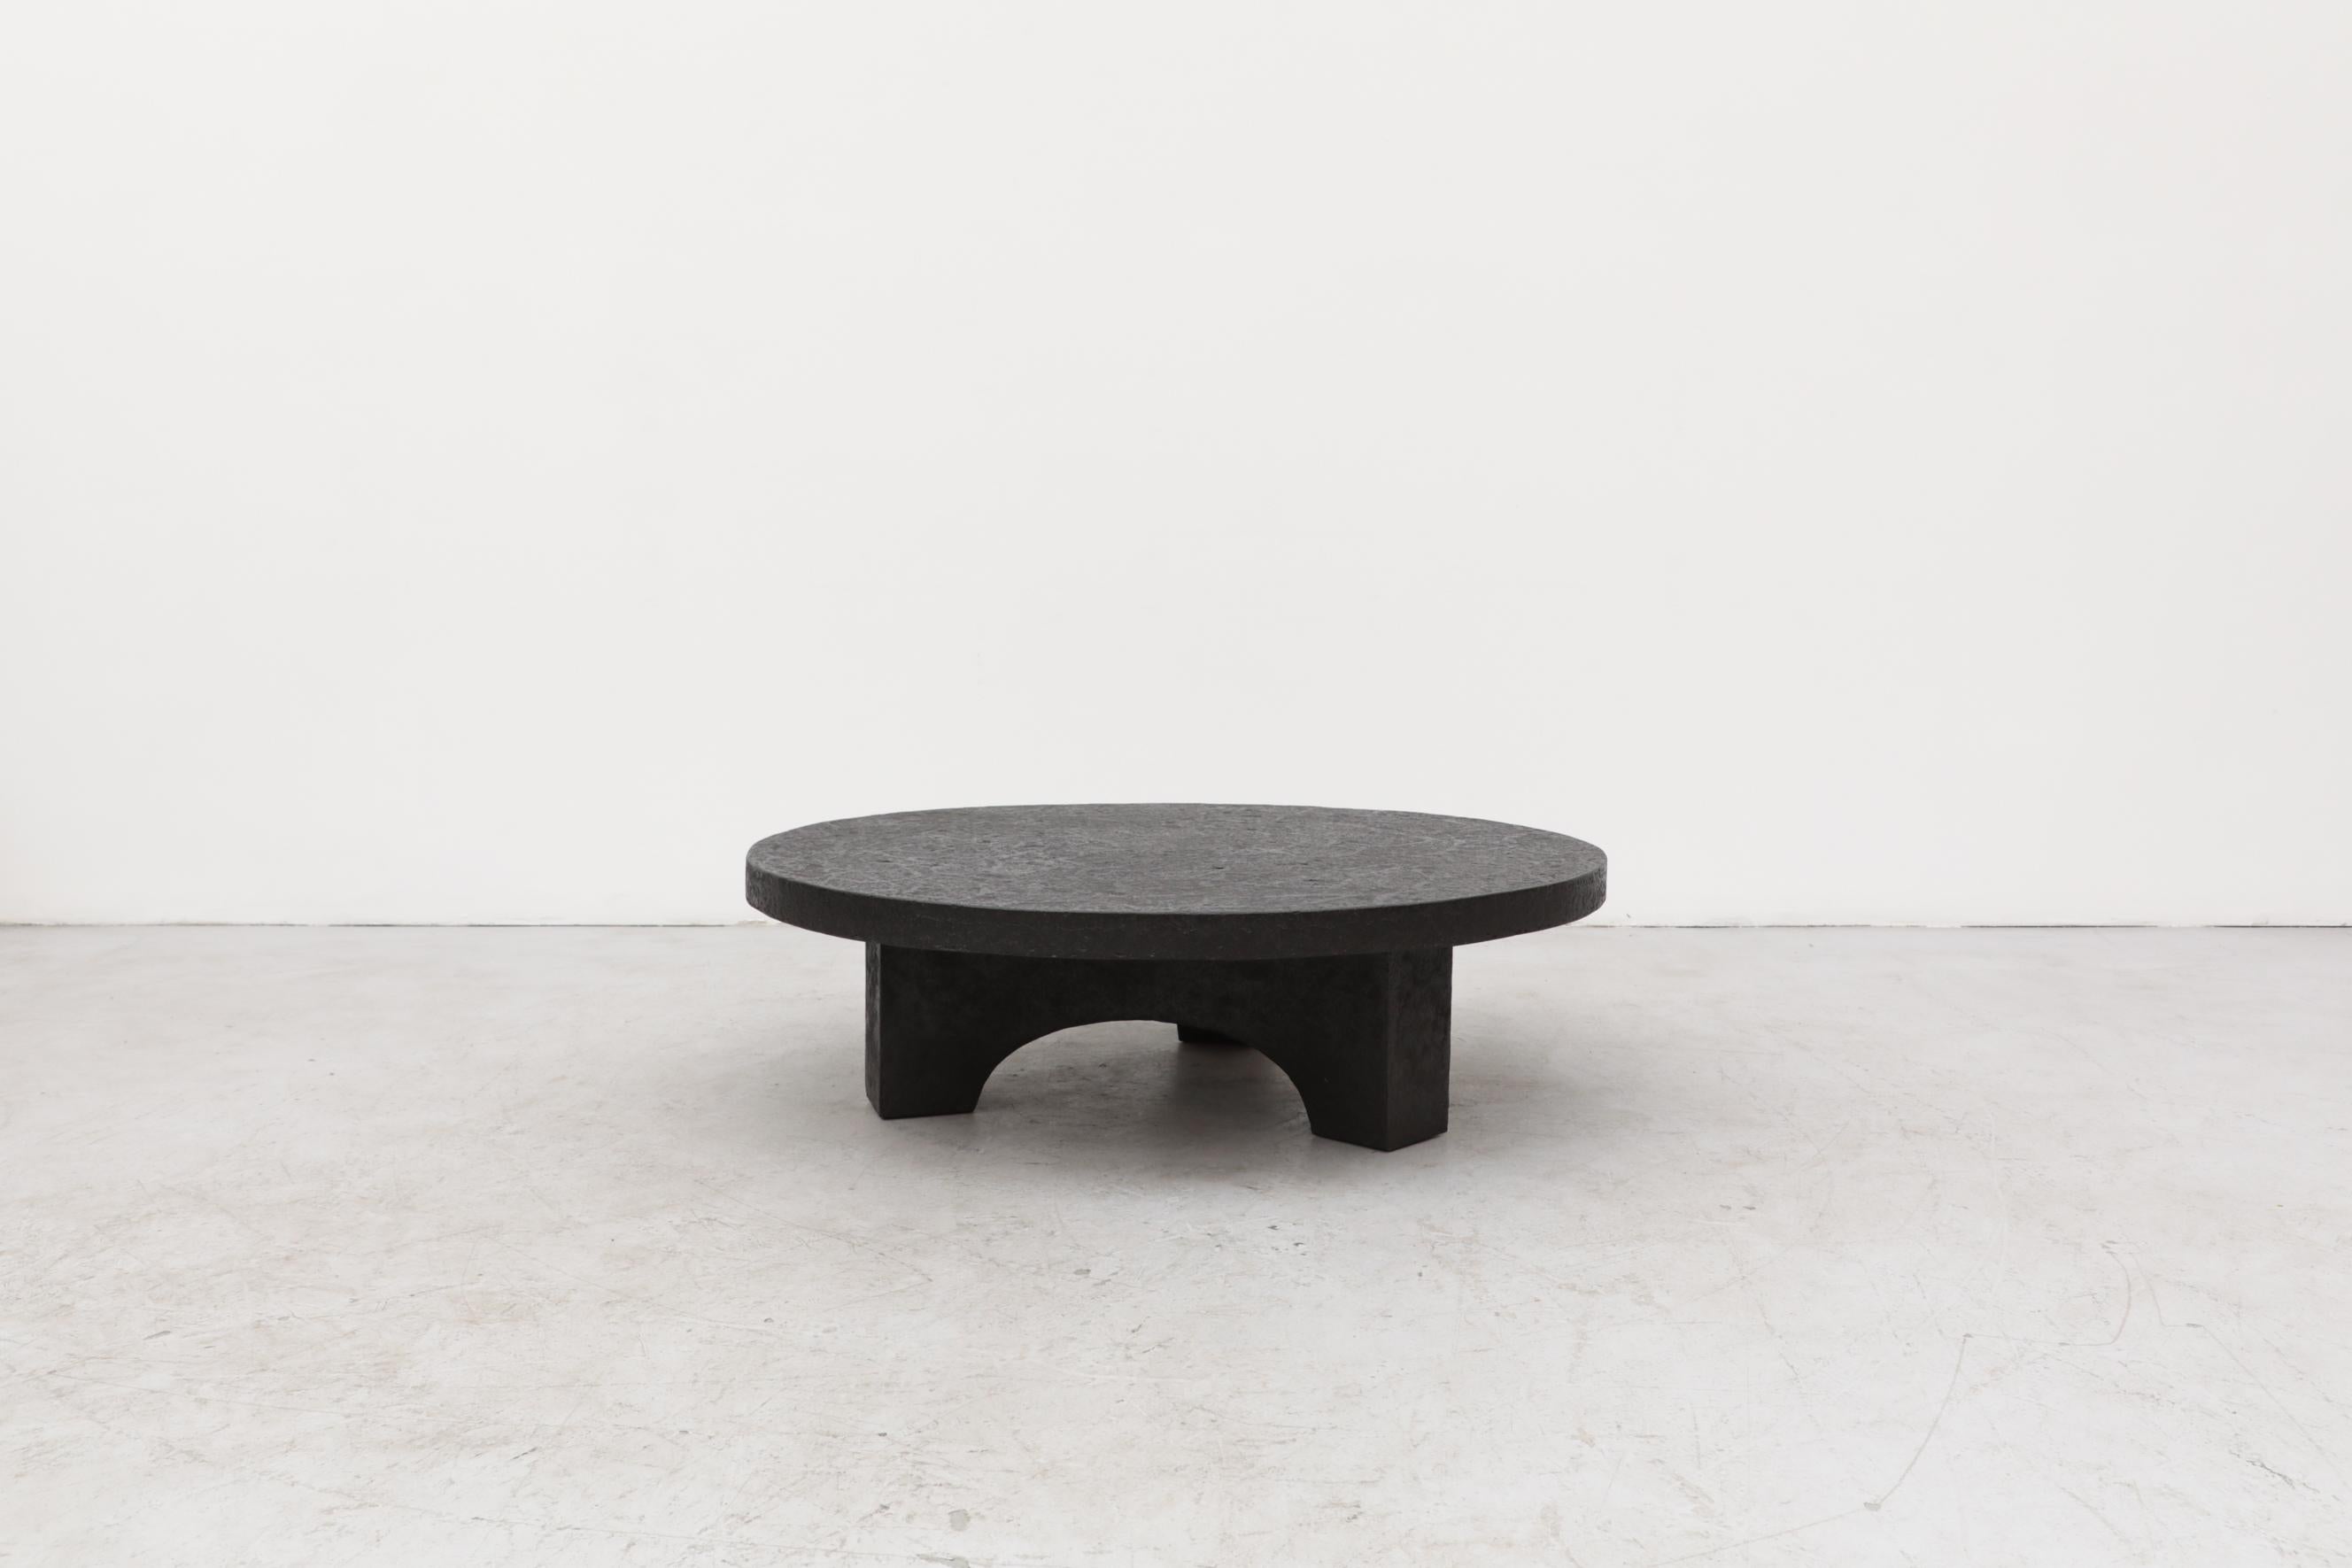 20th Century Round Faux Lava Stone Coffee Table with Arched Base